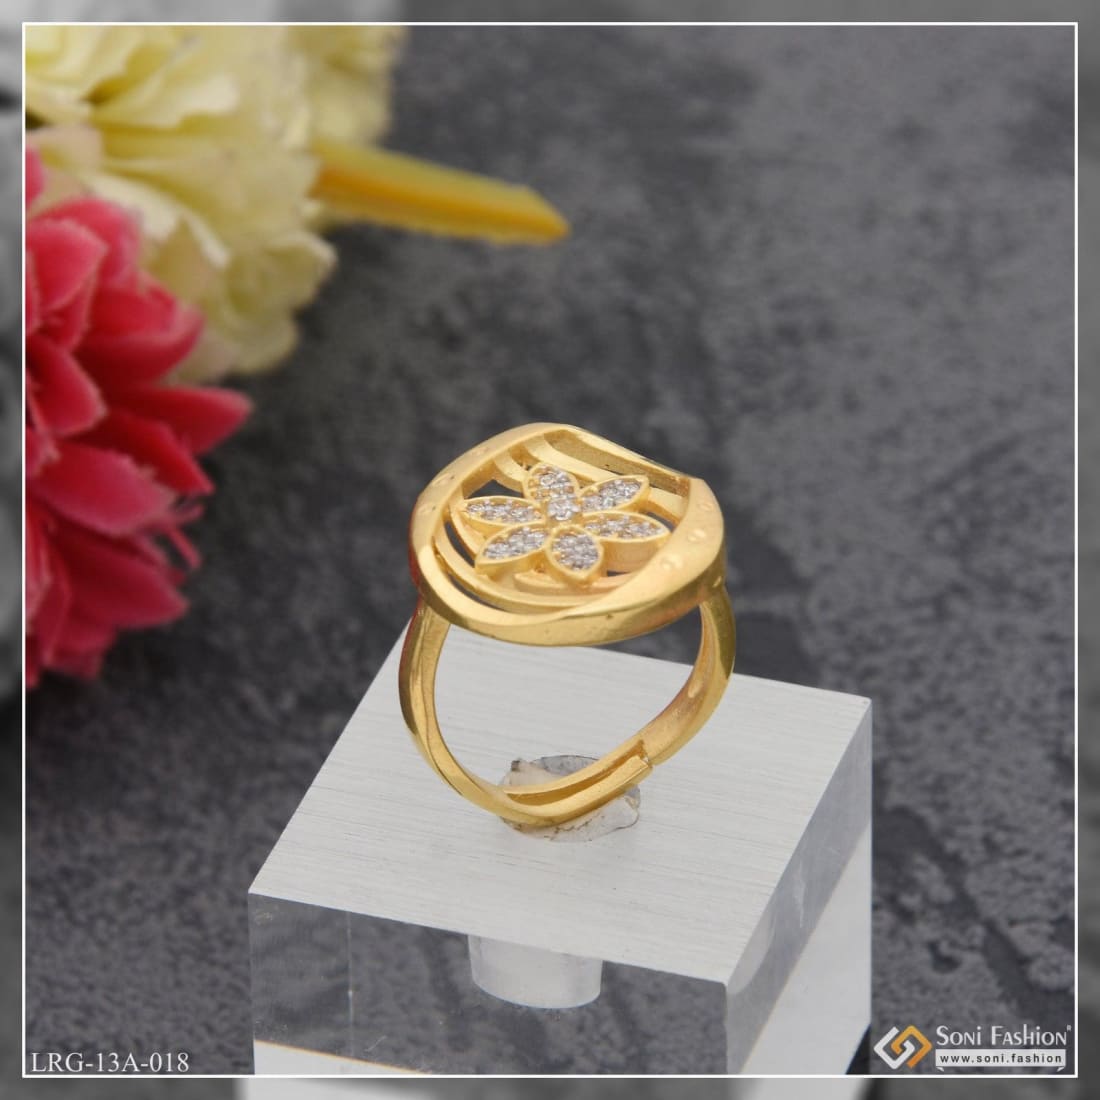 Intertwining Leaves Rose Gold and Diamond Finger Ring